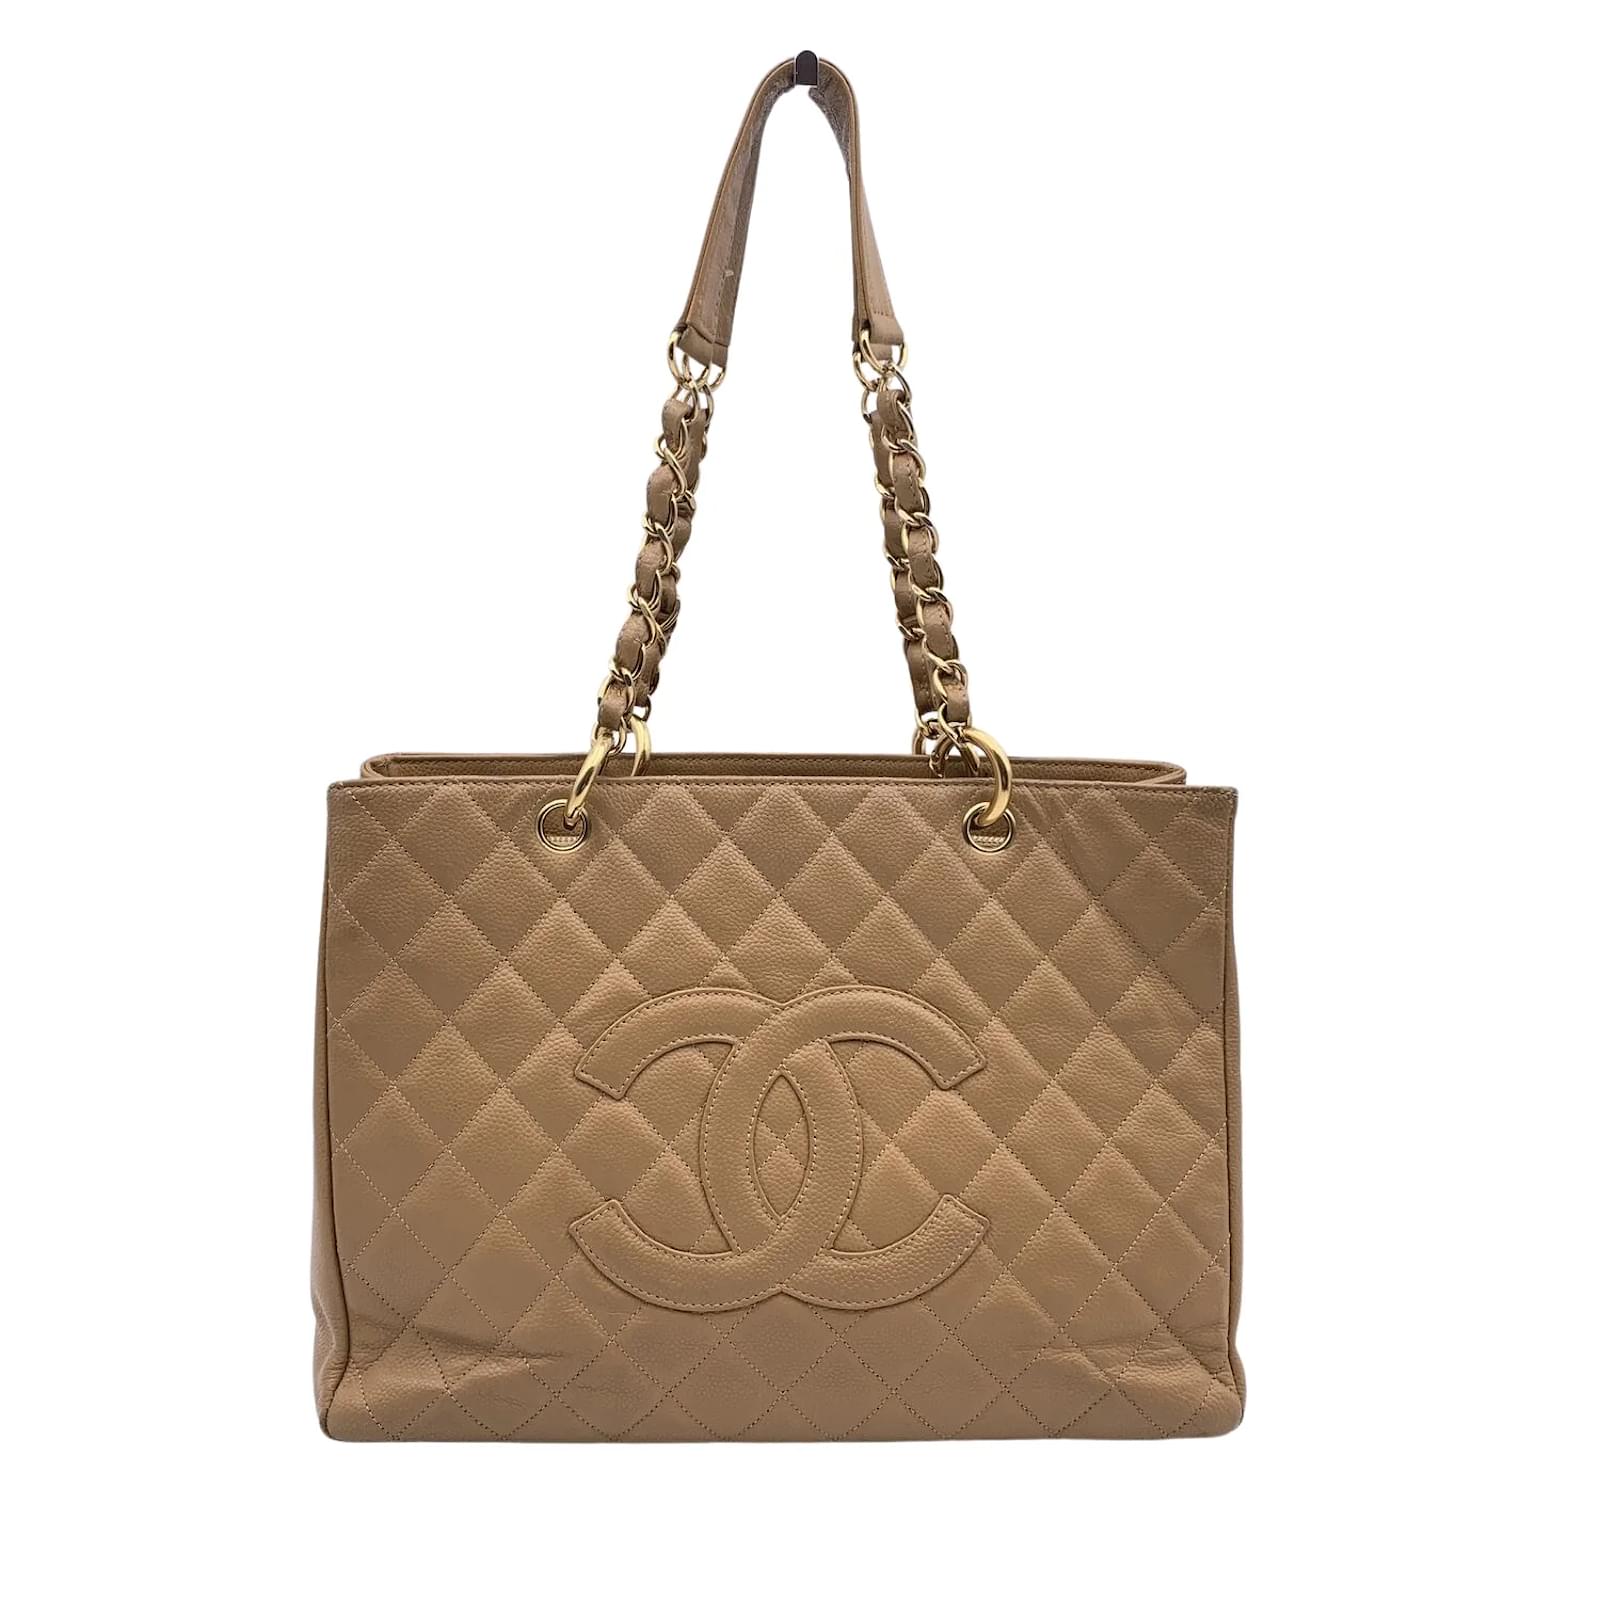 Chanel Vintage Beige Quilted Leather GST 1997 Grand Shopping Tote